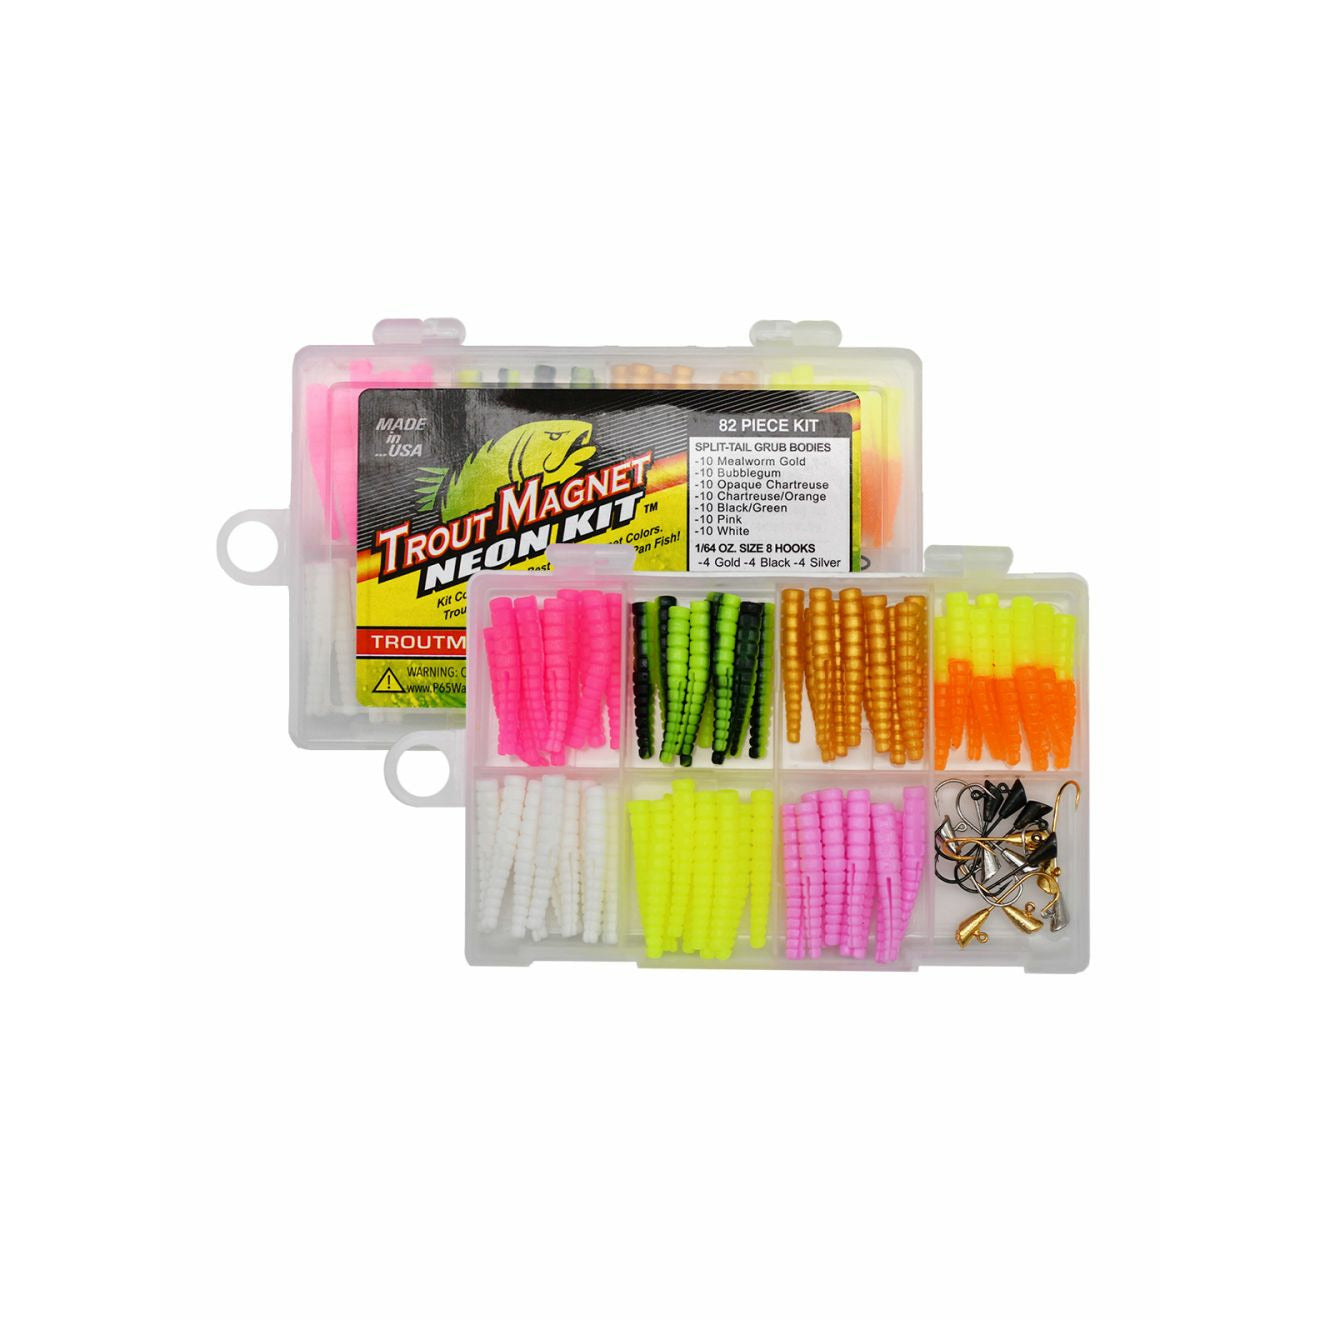 LELAND LURES CRAPPIE MAGNET BEST OF THE BEST KIT